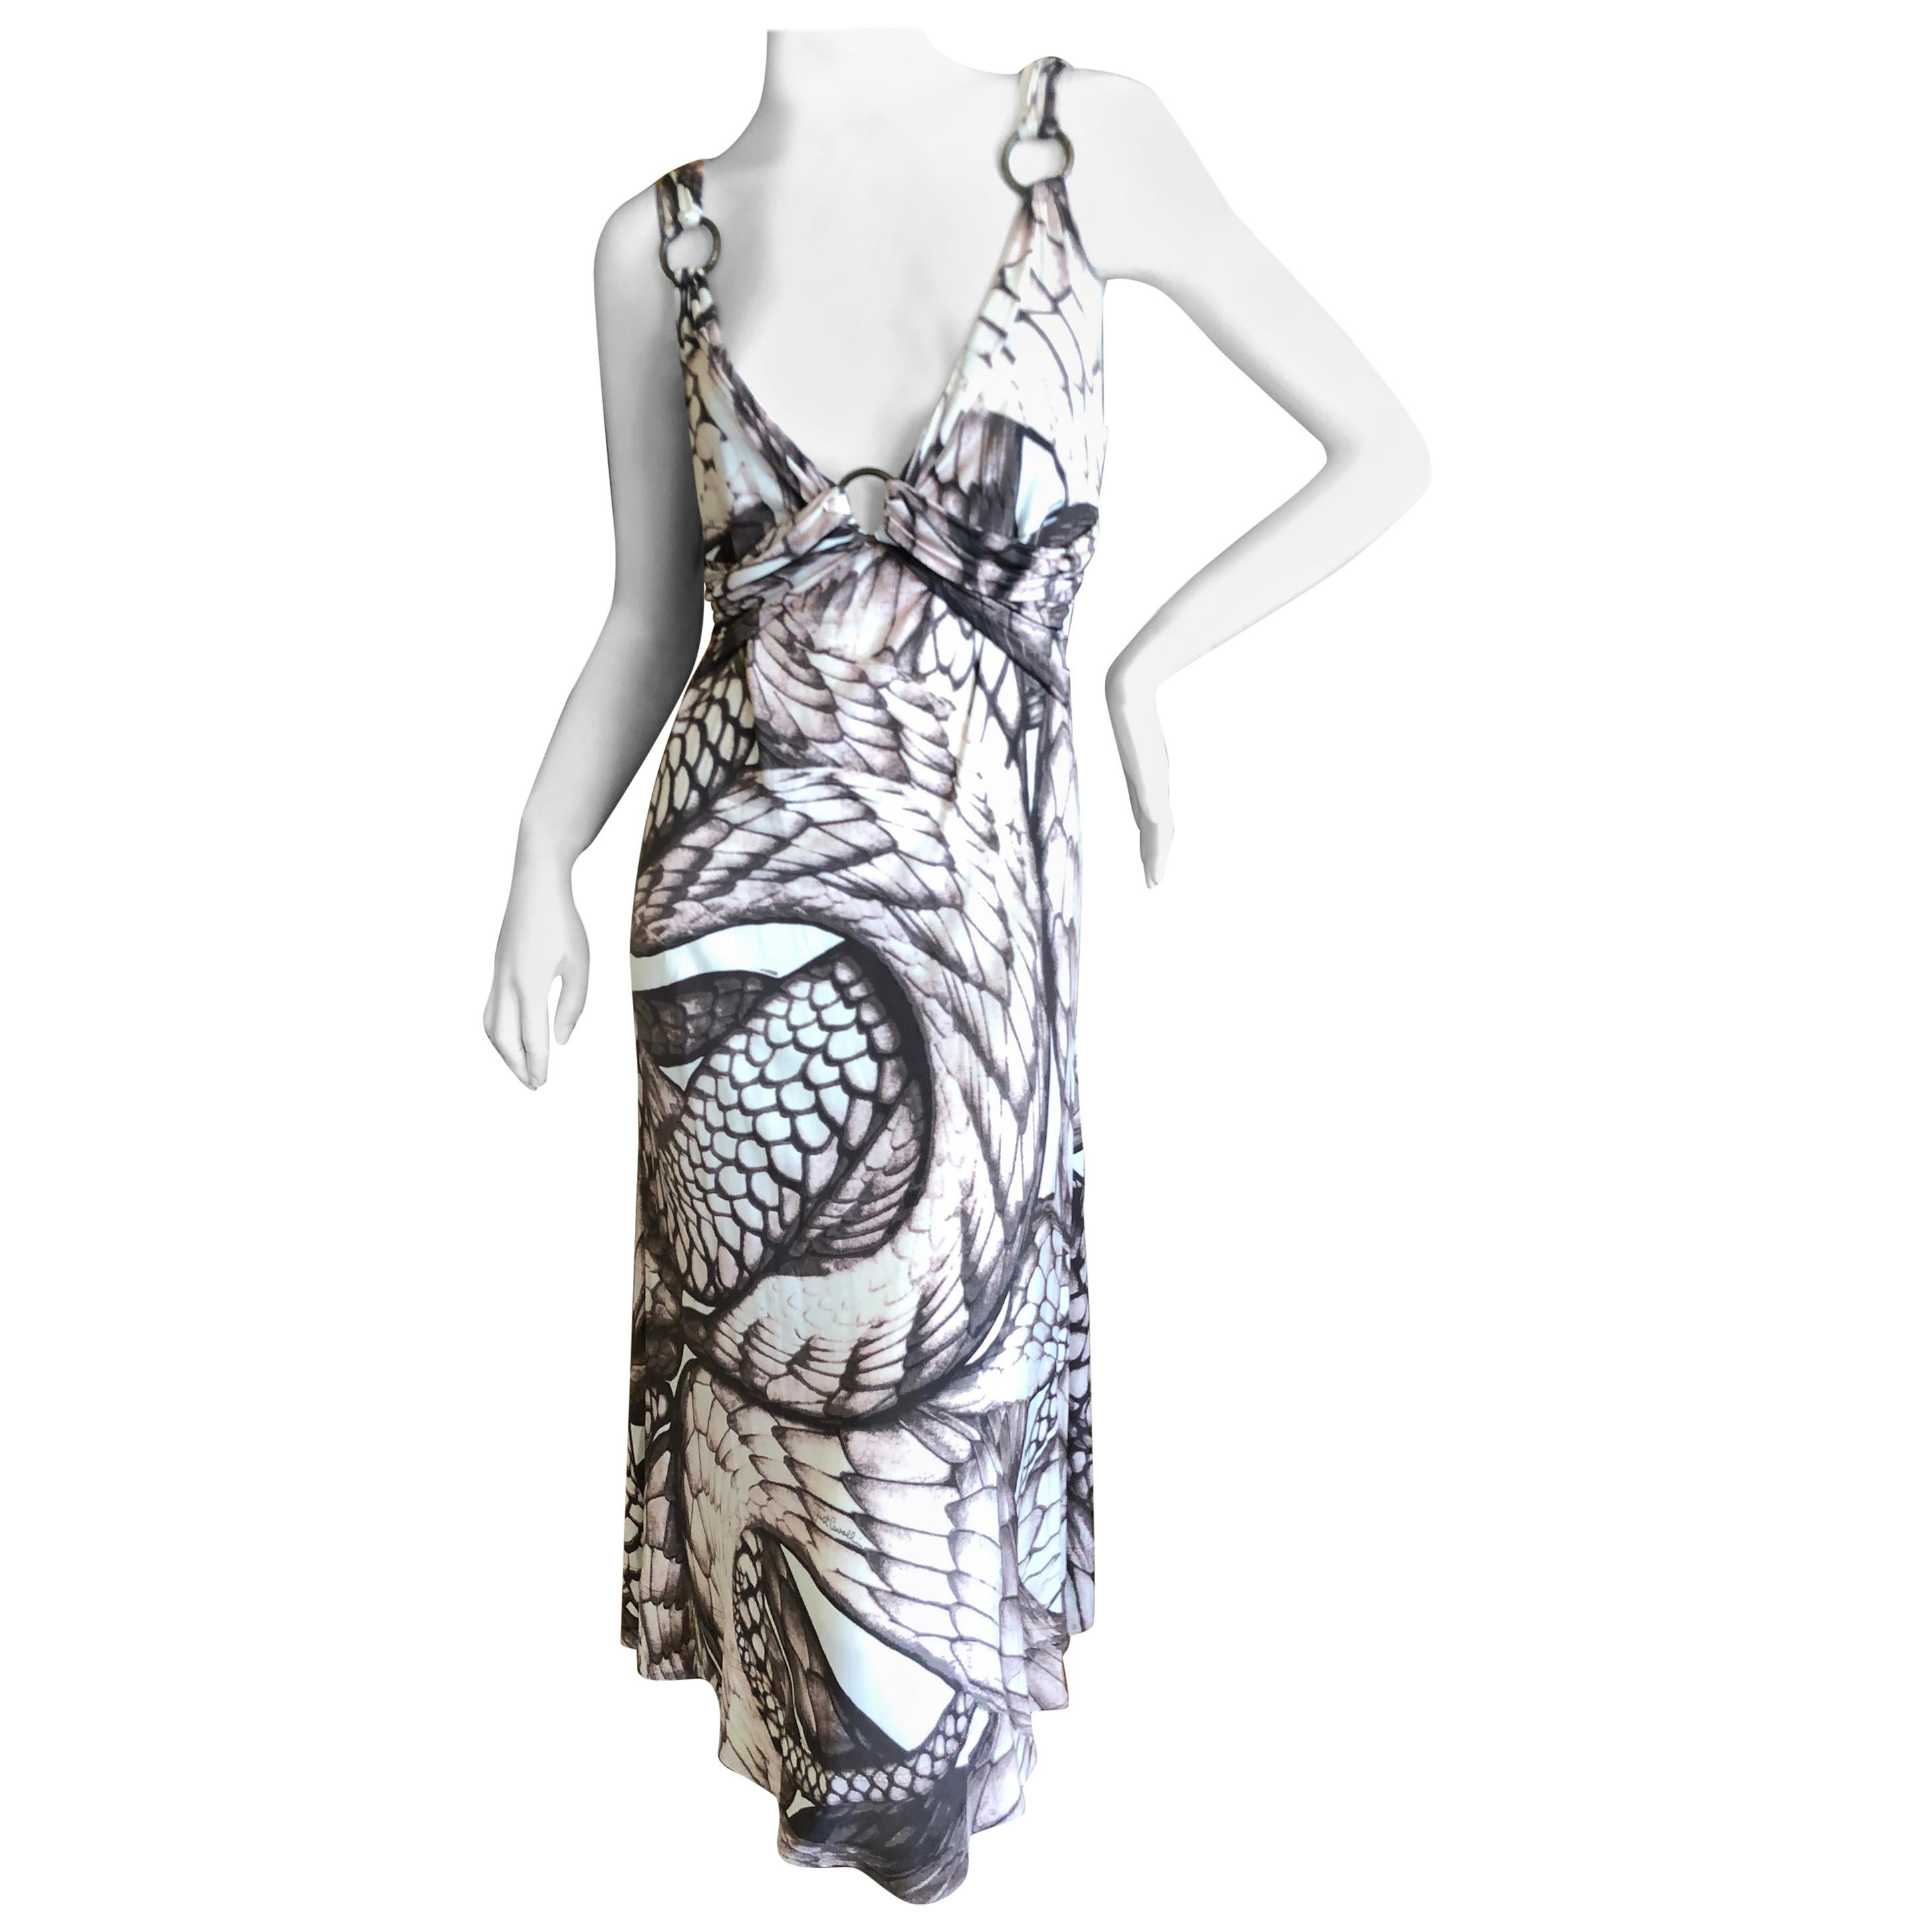 Roberto Cavalli for Just Cavalli Snake Print Dress with Brass Rings Sz 46 For Sale